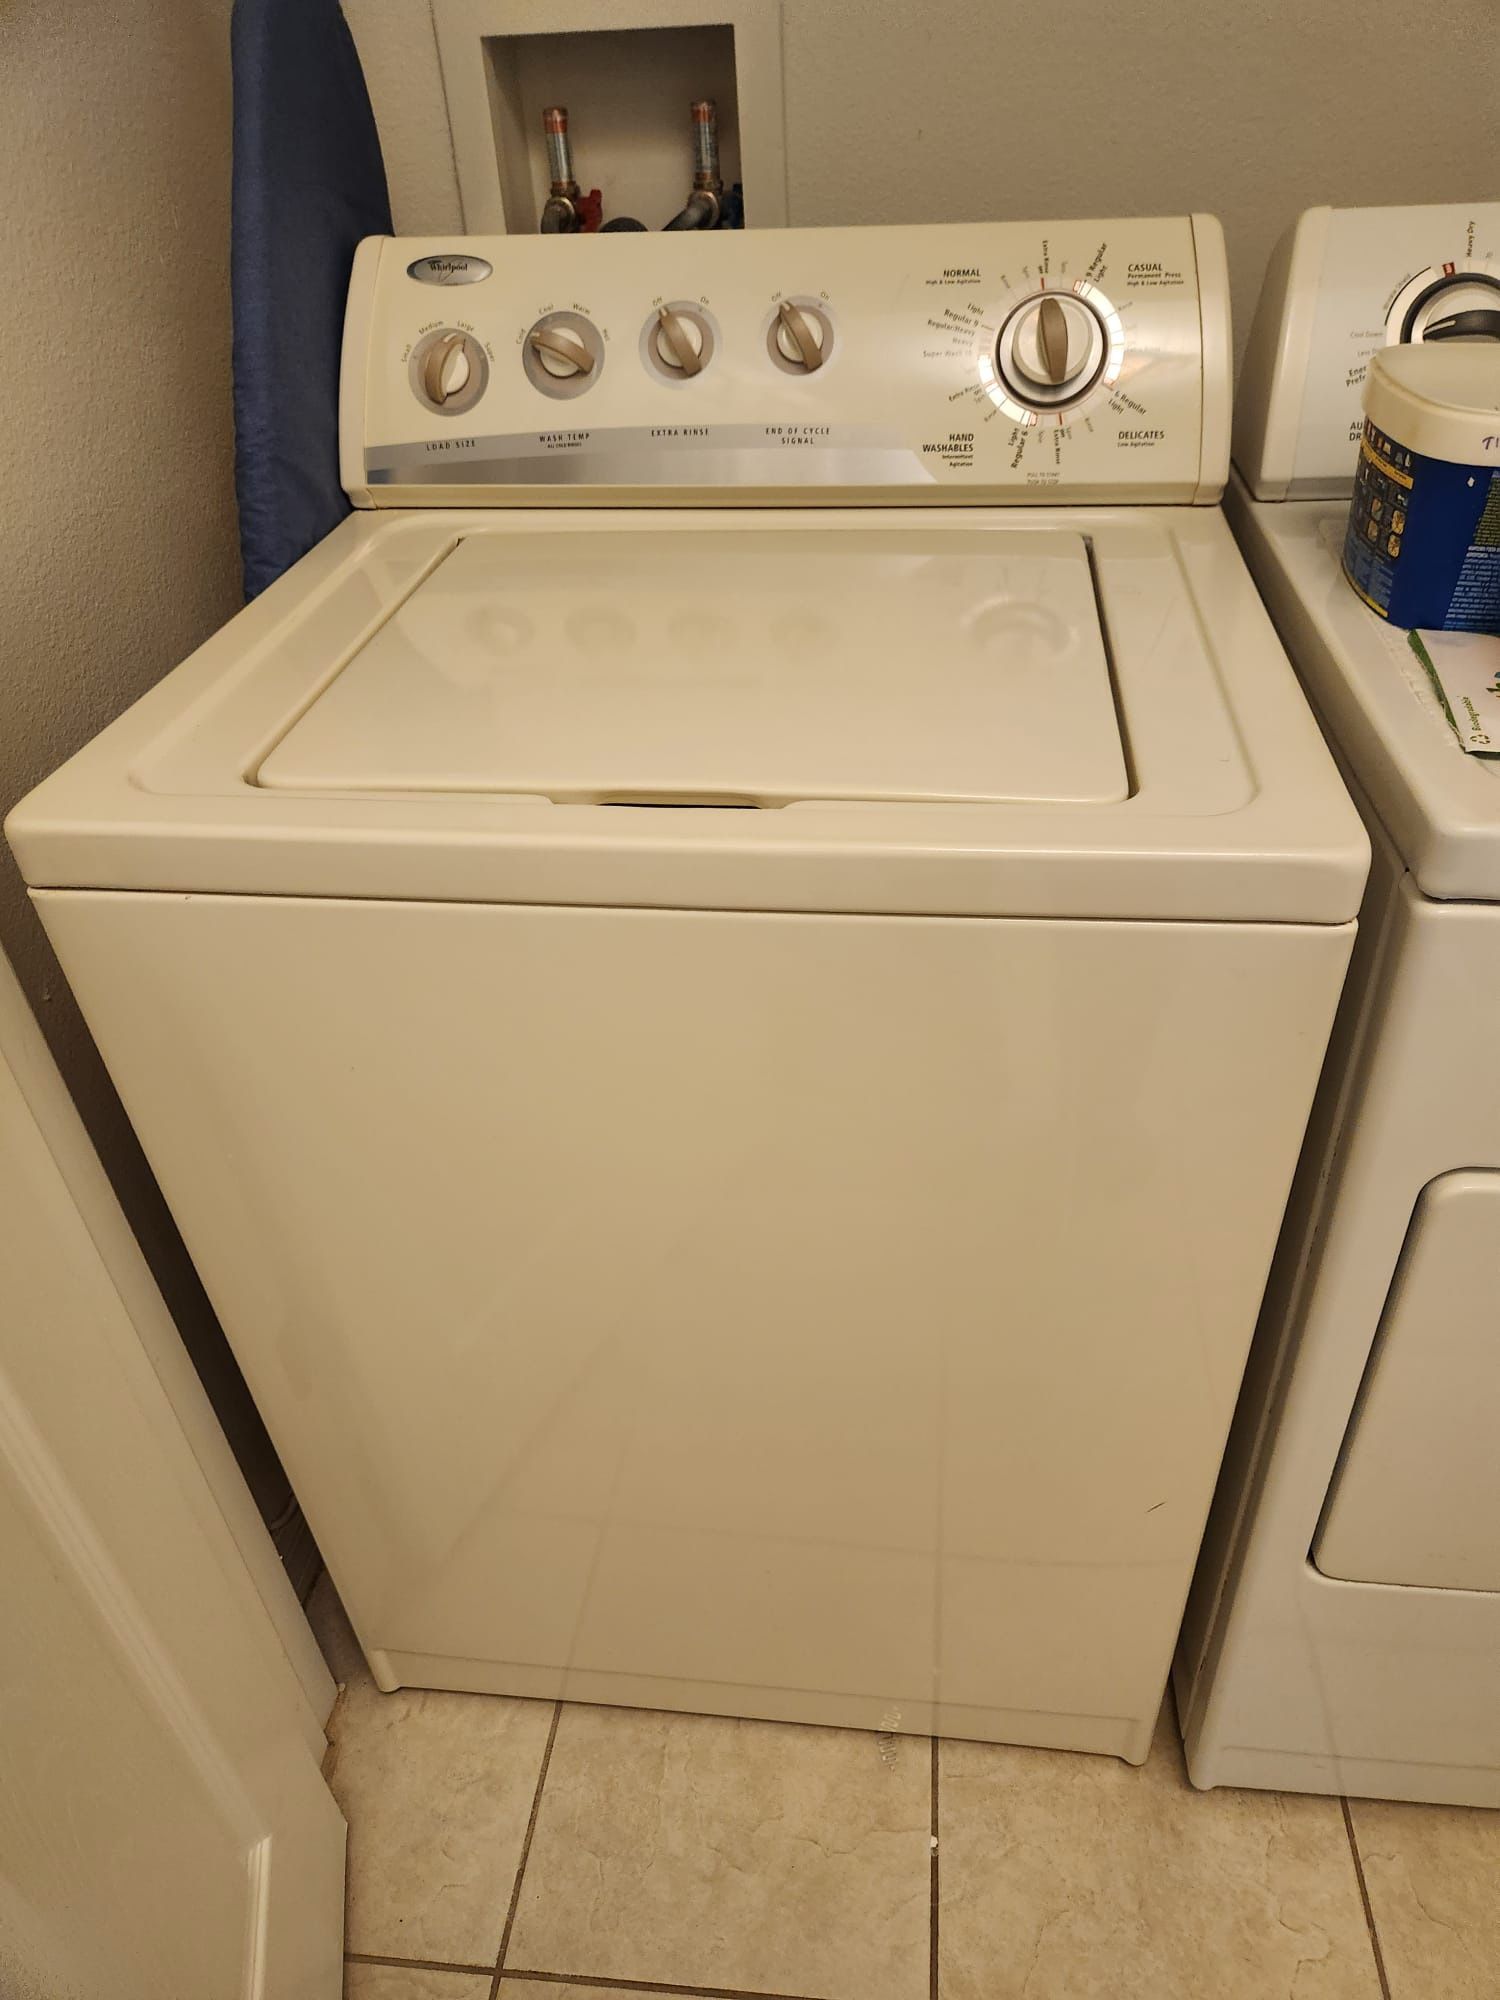 Whirlpool Washer & Dryer For Both $100